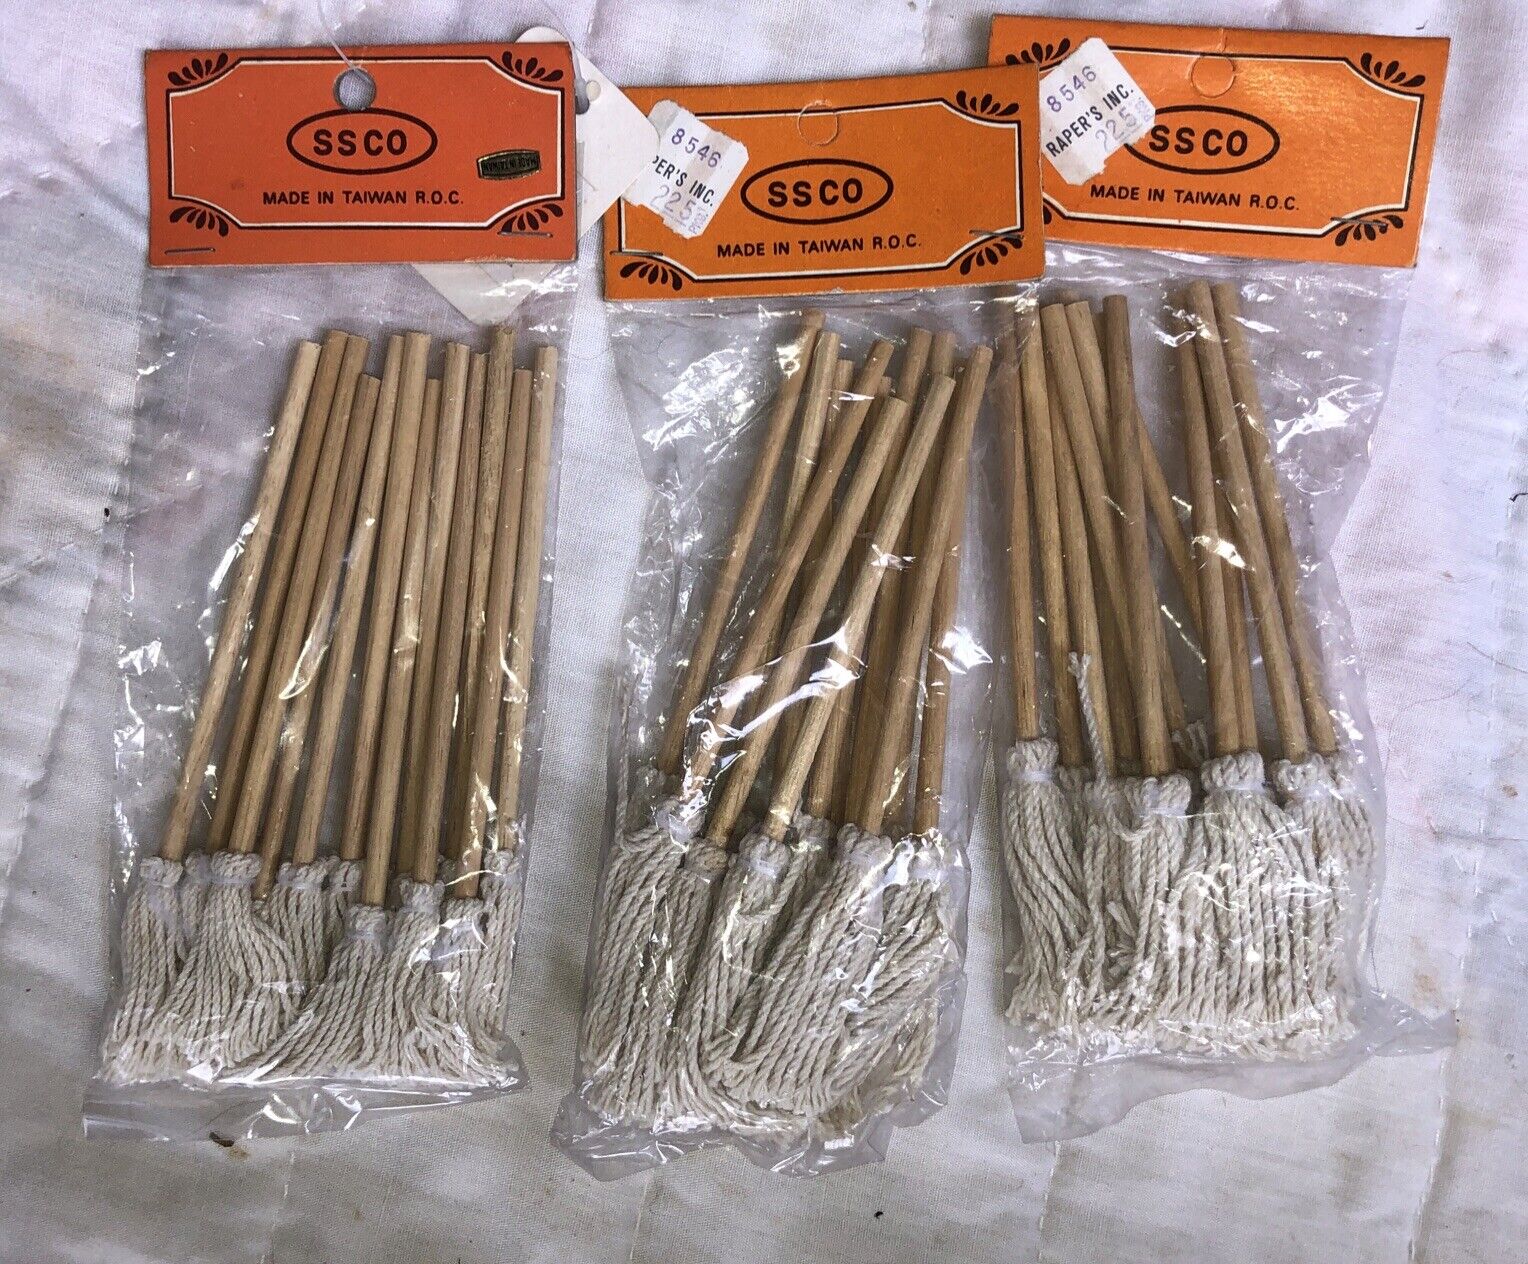 Lot Of 36 Vintage Ssco Taiwan 5” Wooden Brooms Craft Making Supplies - New